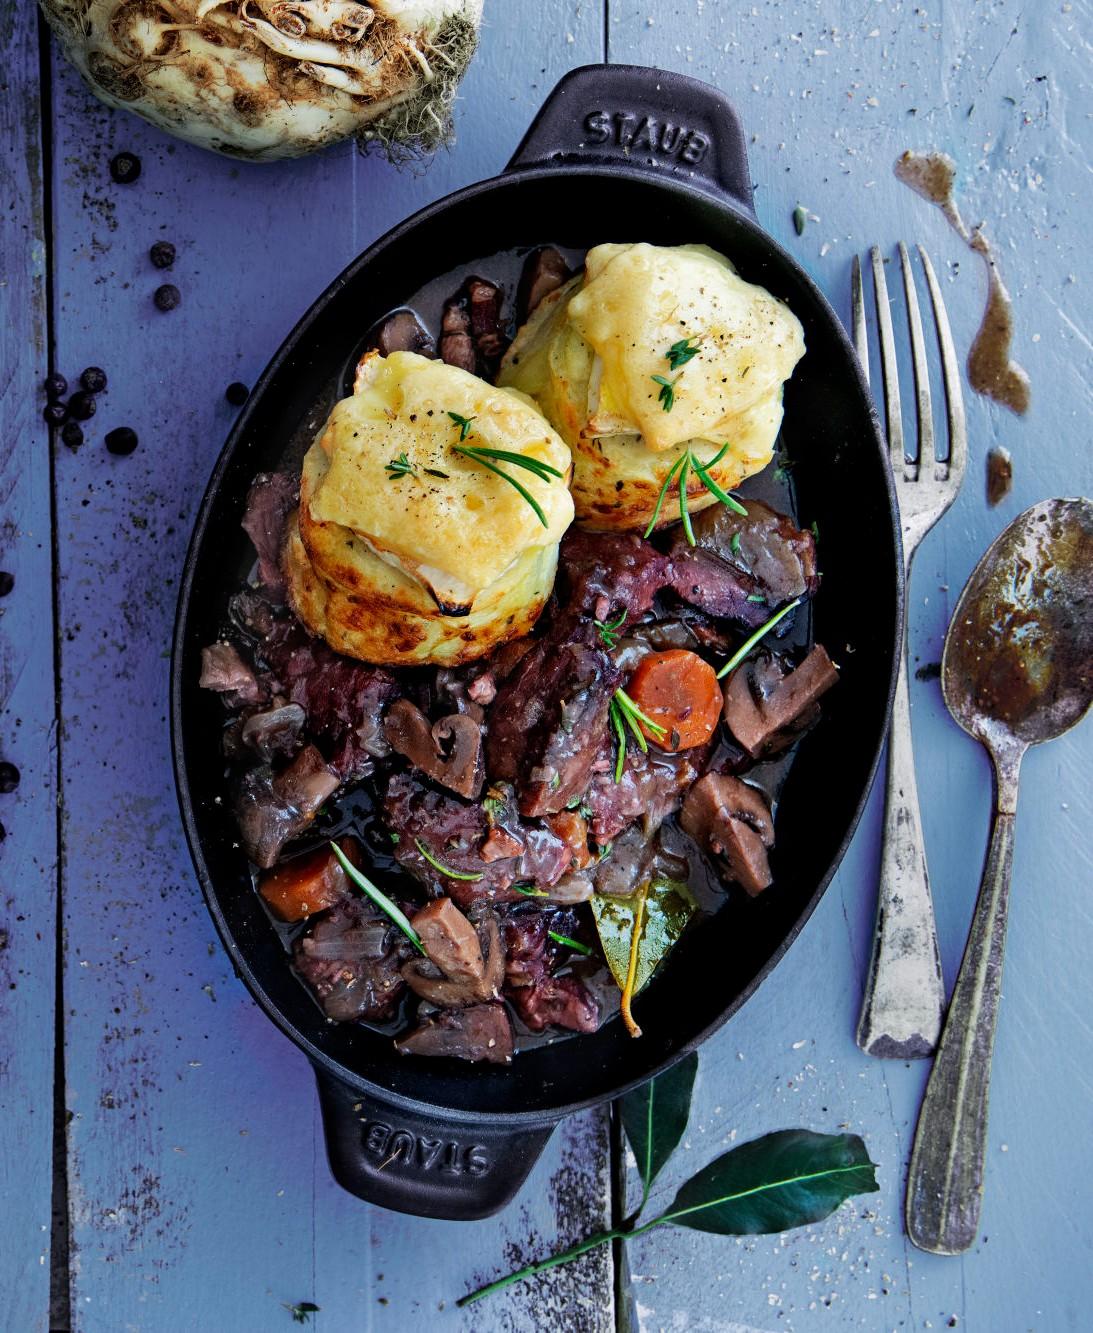 Beef bourguignon with gratins